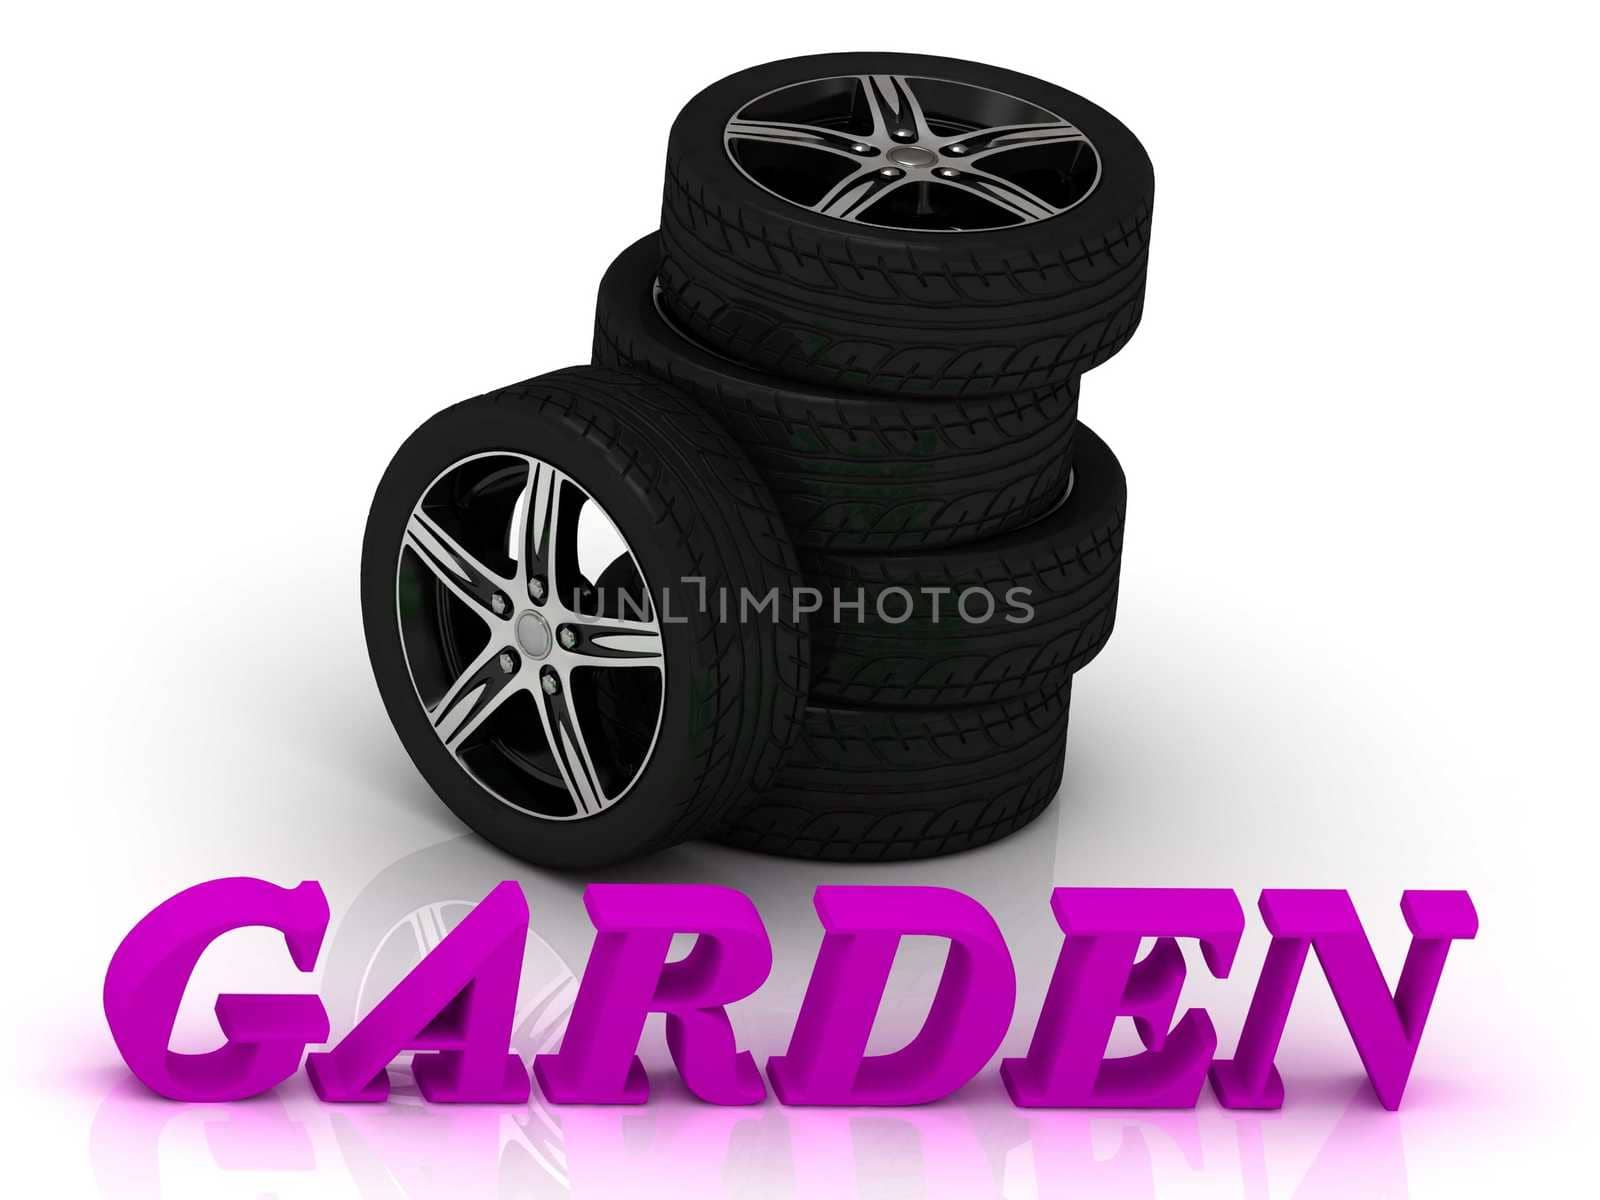 GARDEN- bright letters and rims mashine black wheels on a white background